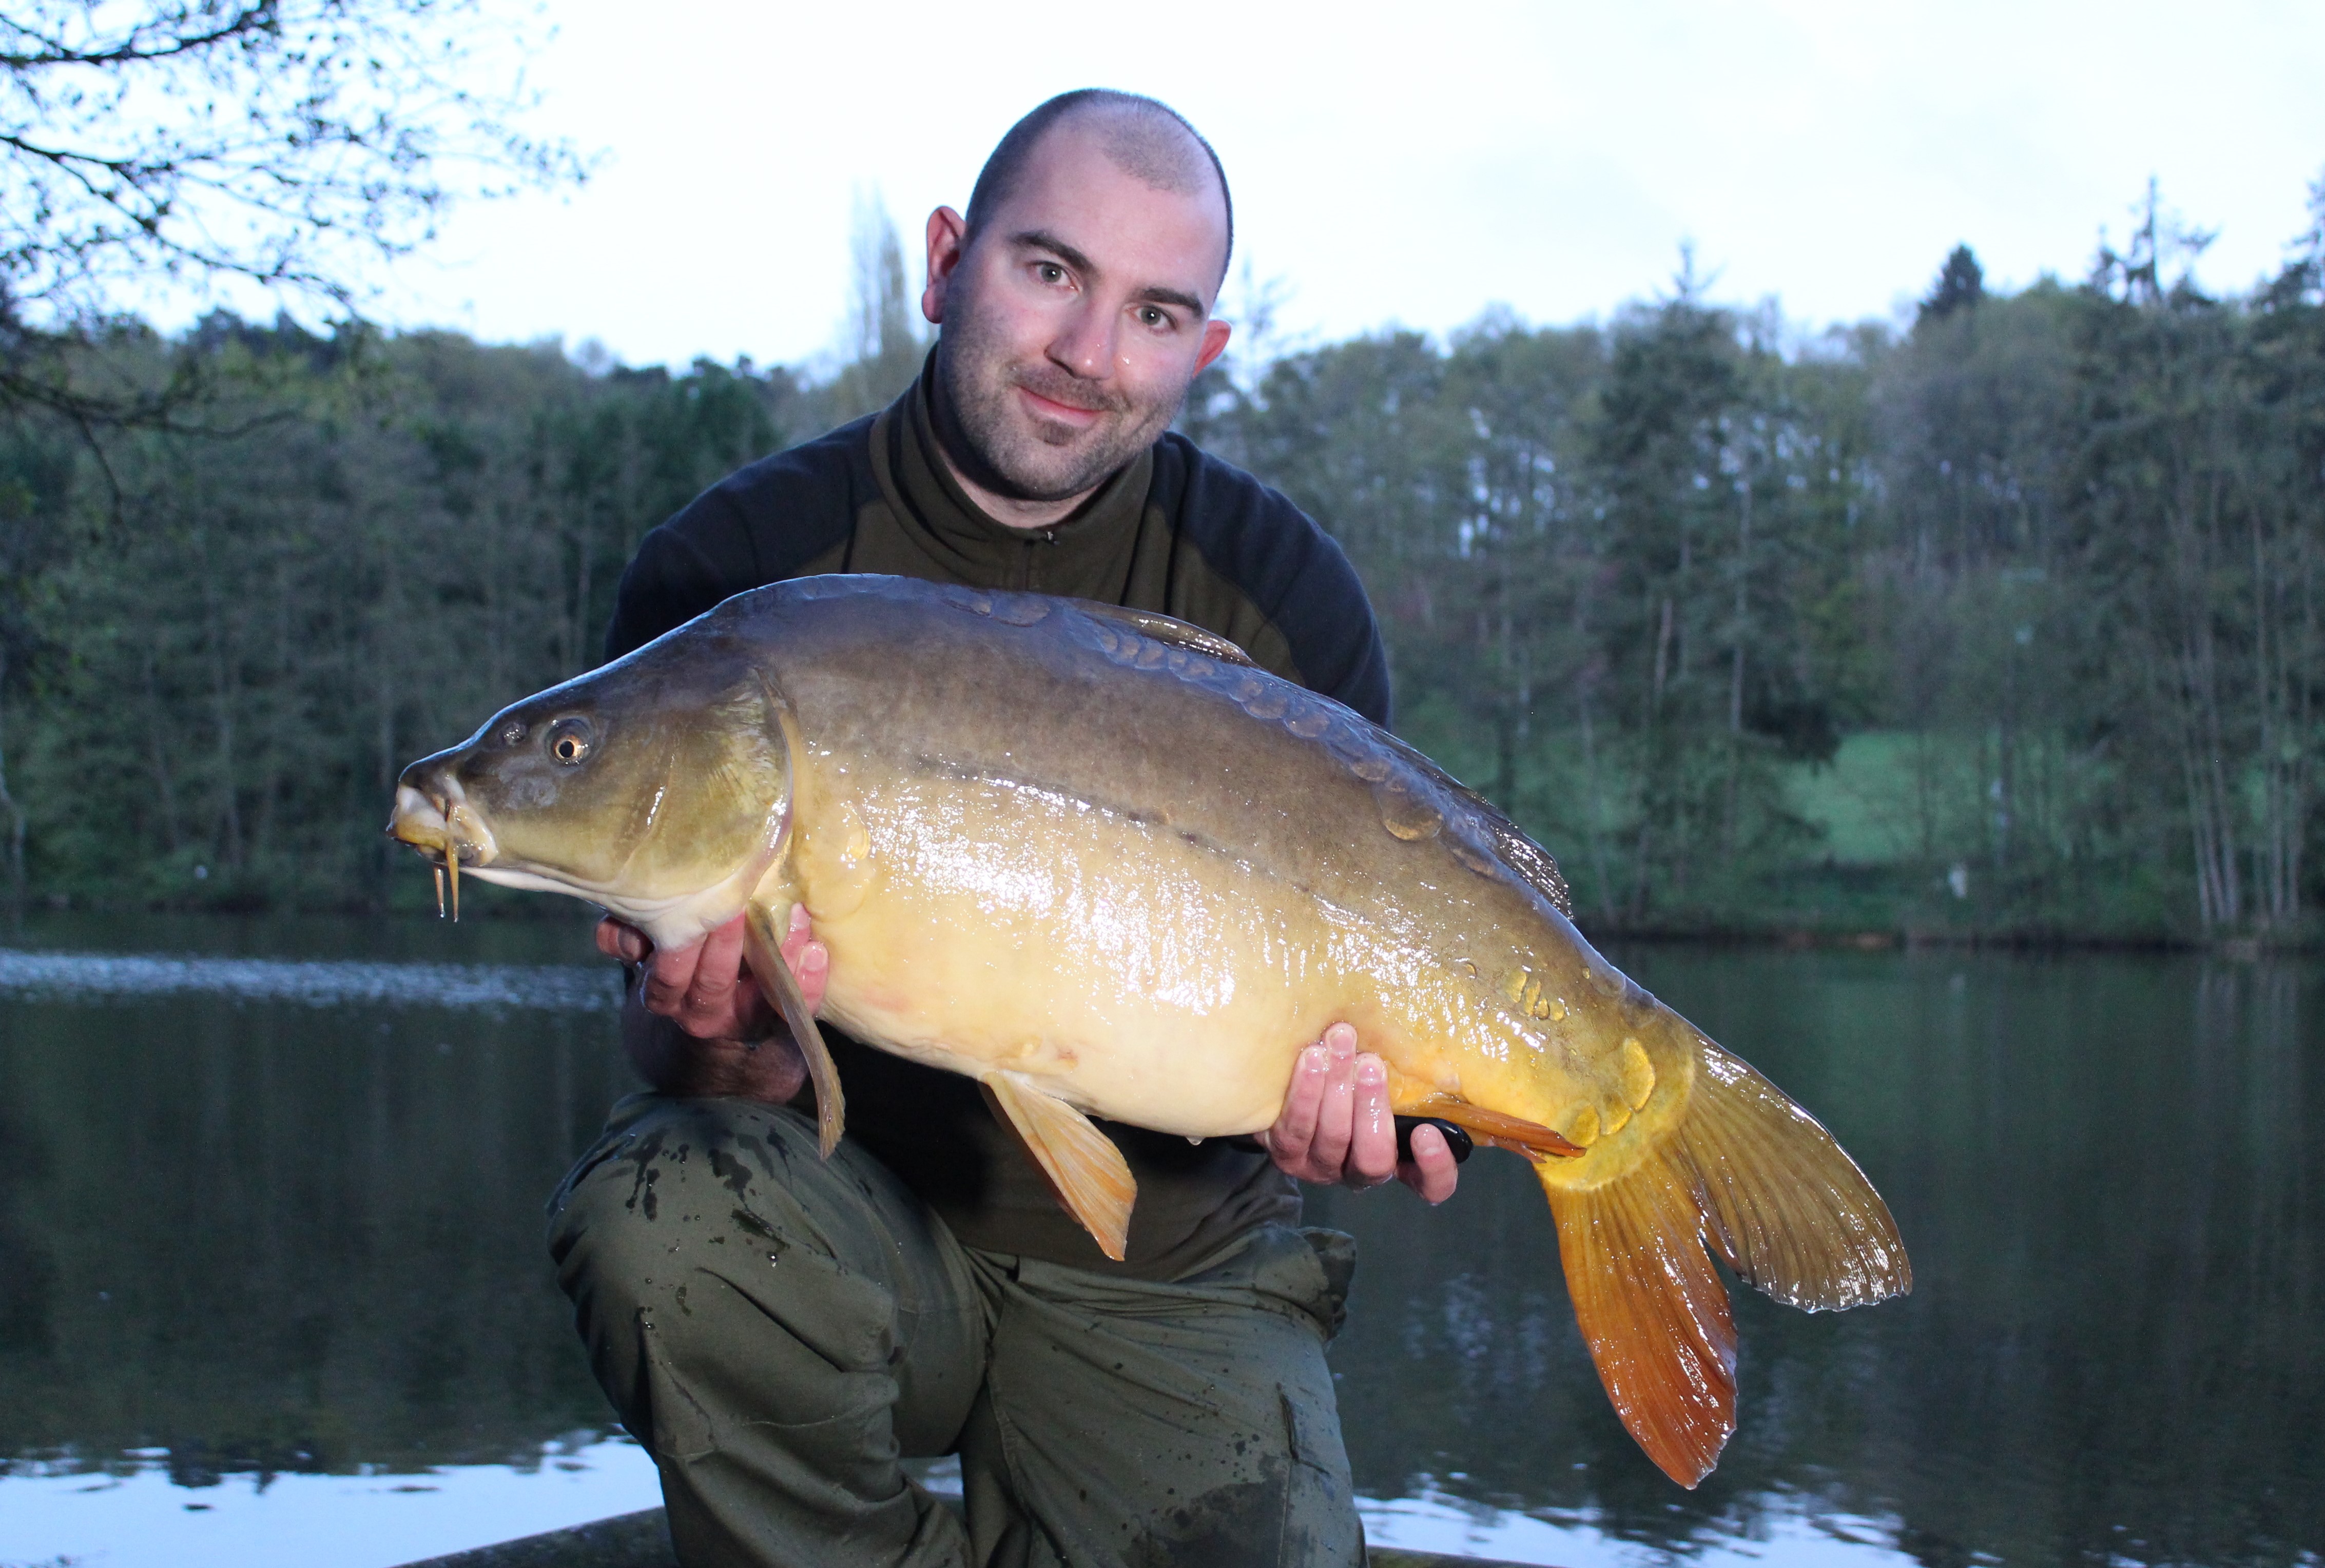 Mike Linstead, Angling Lines Field Tester, with a French mirror carp from La Fonte